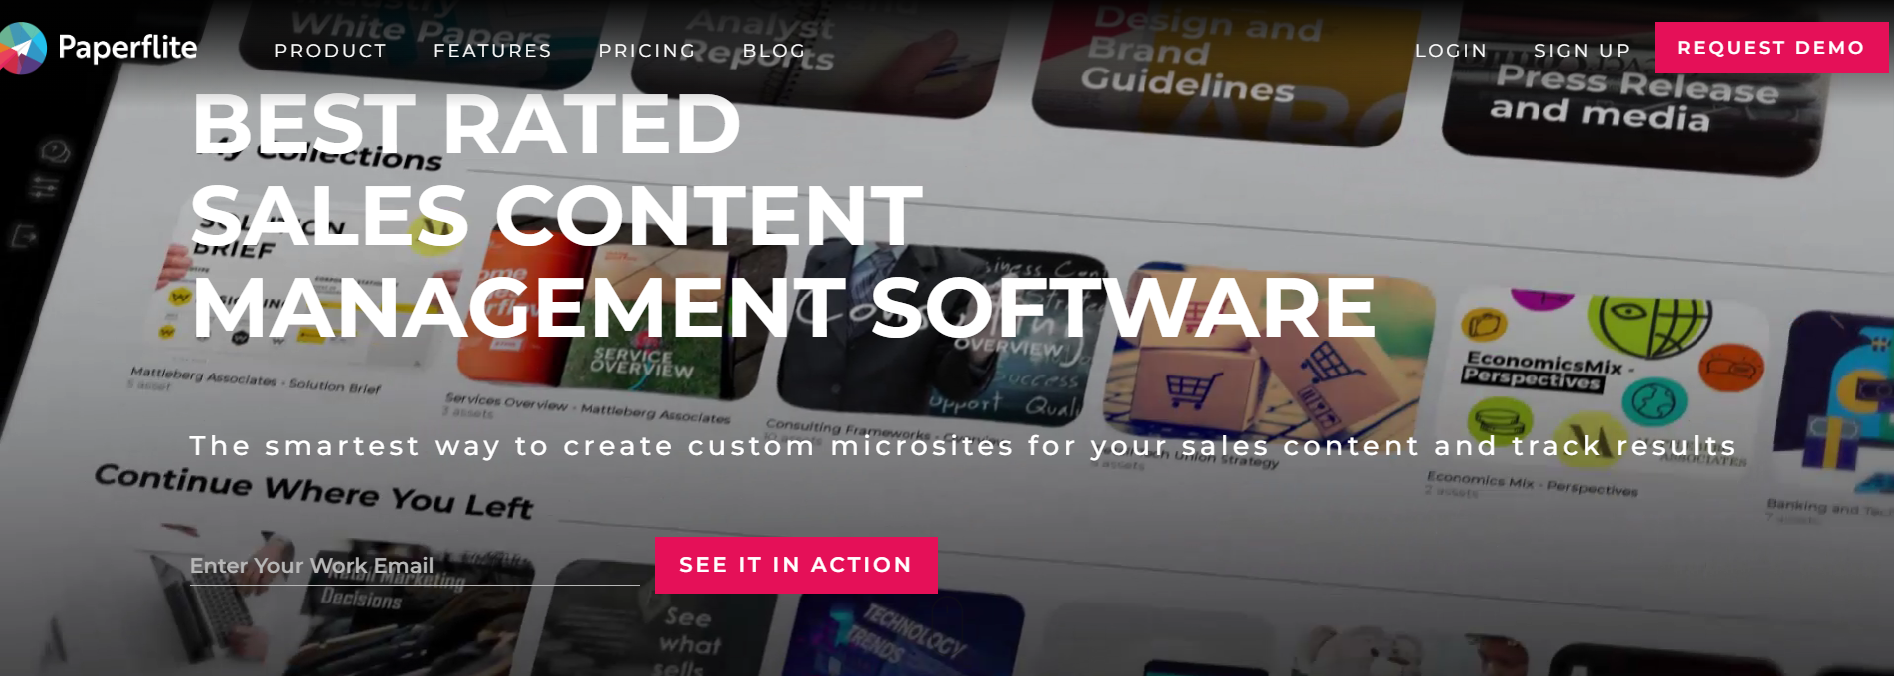 Paperflite homepage: Best Rated Sales Content Management Software